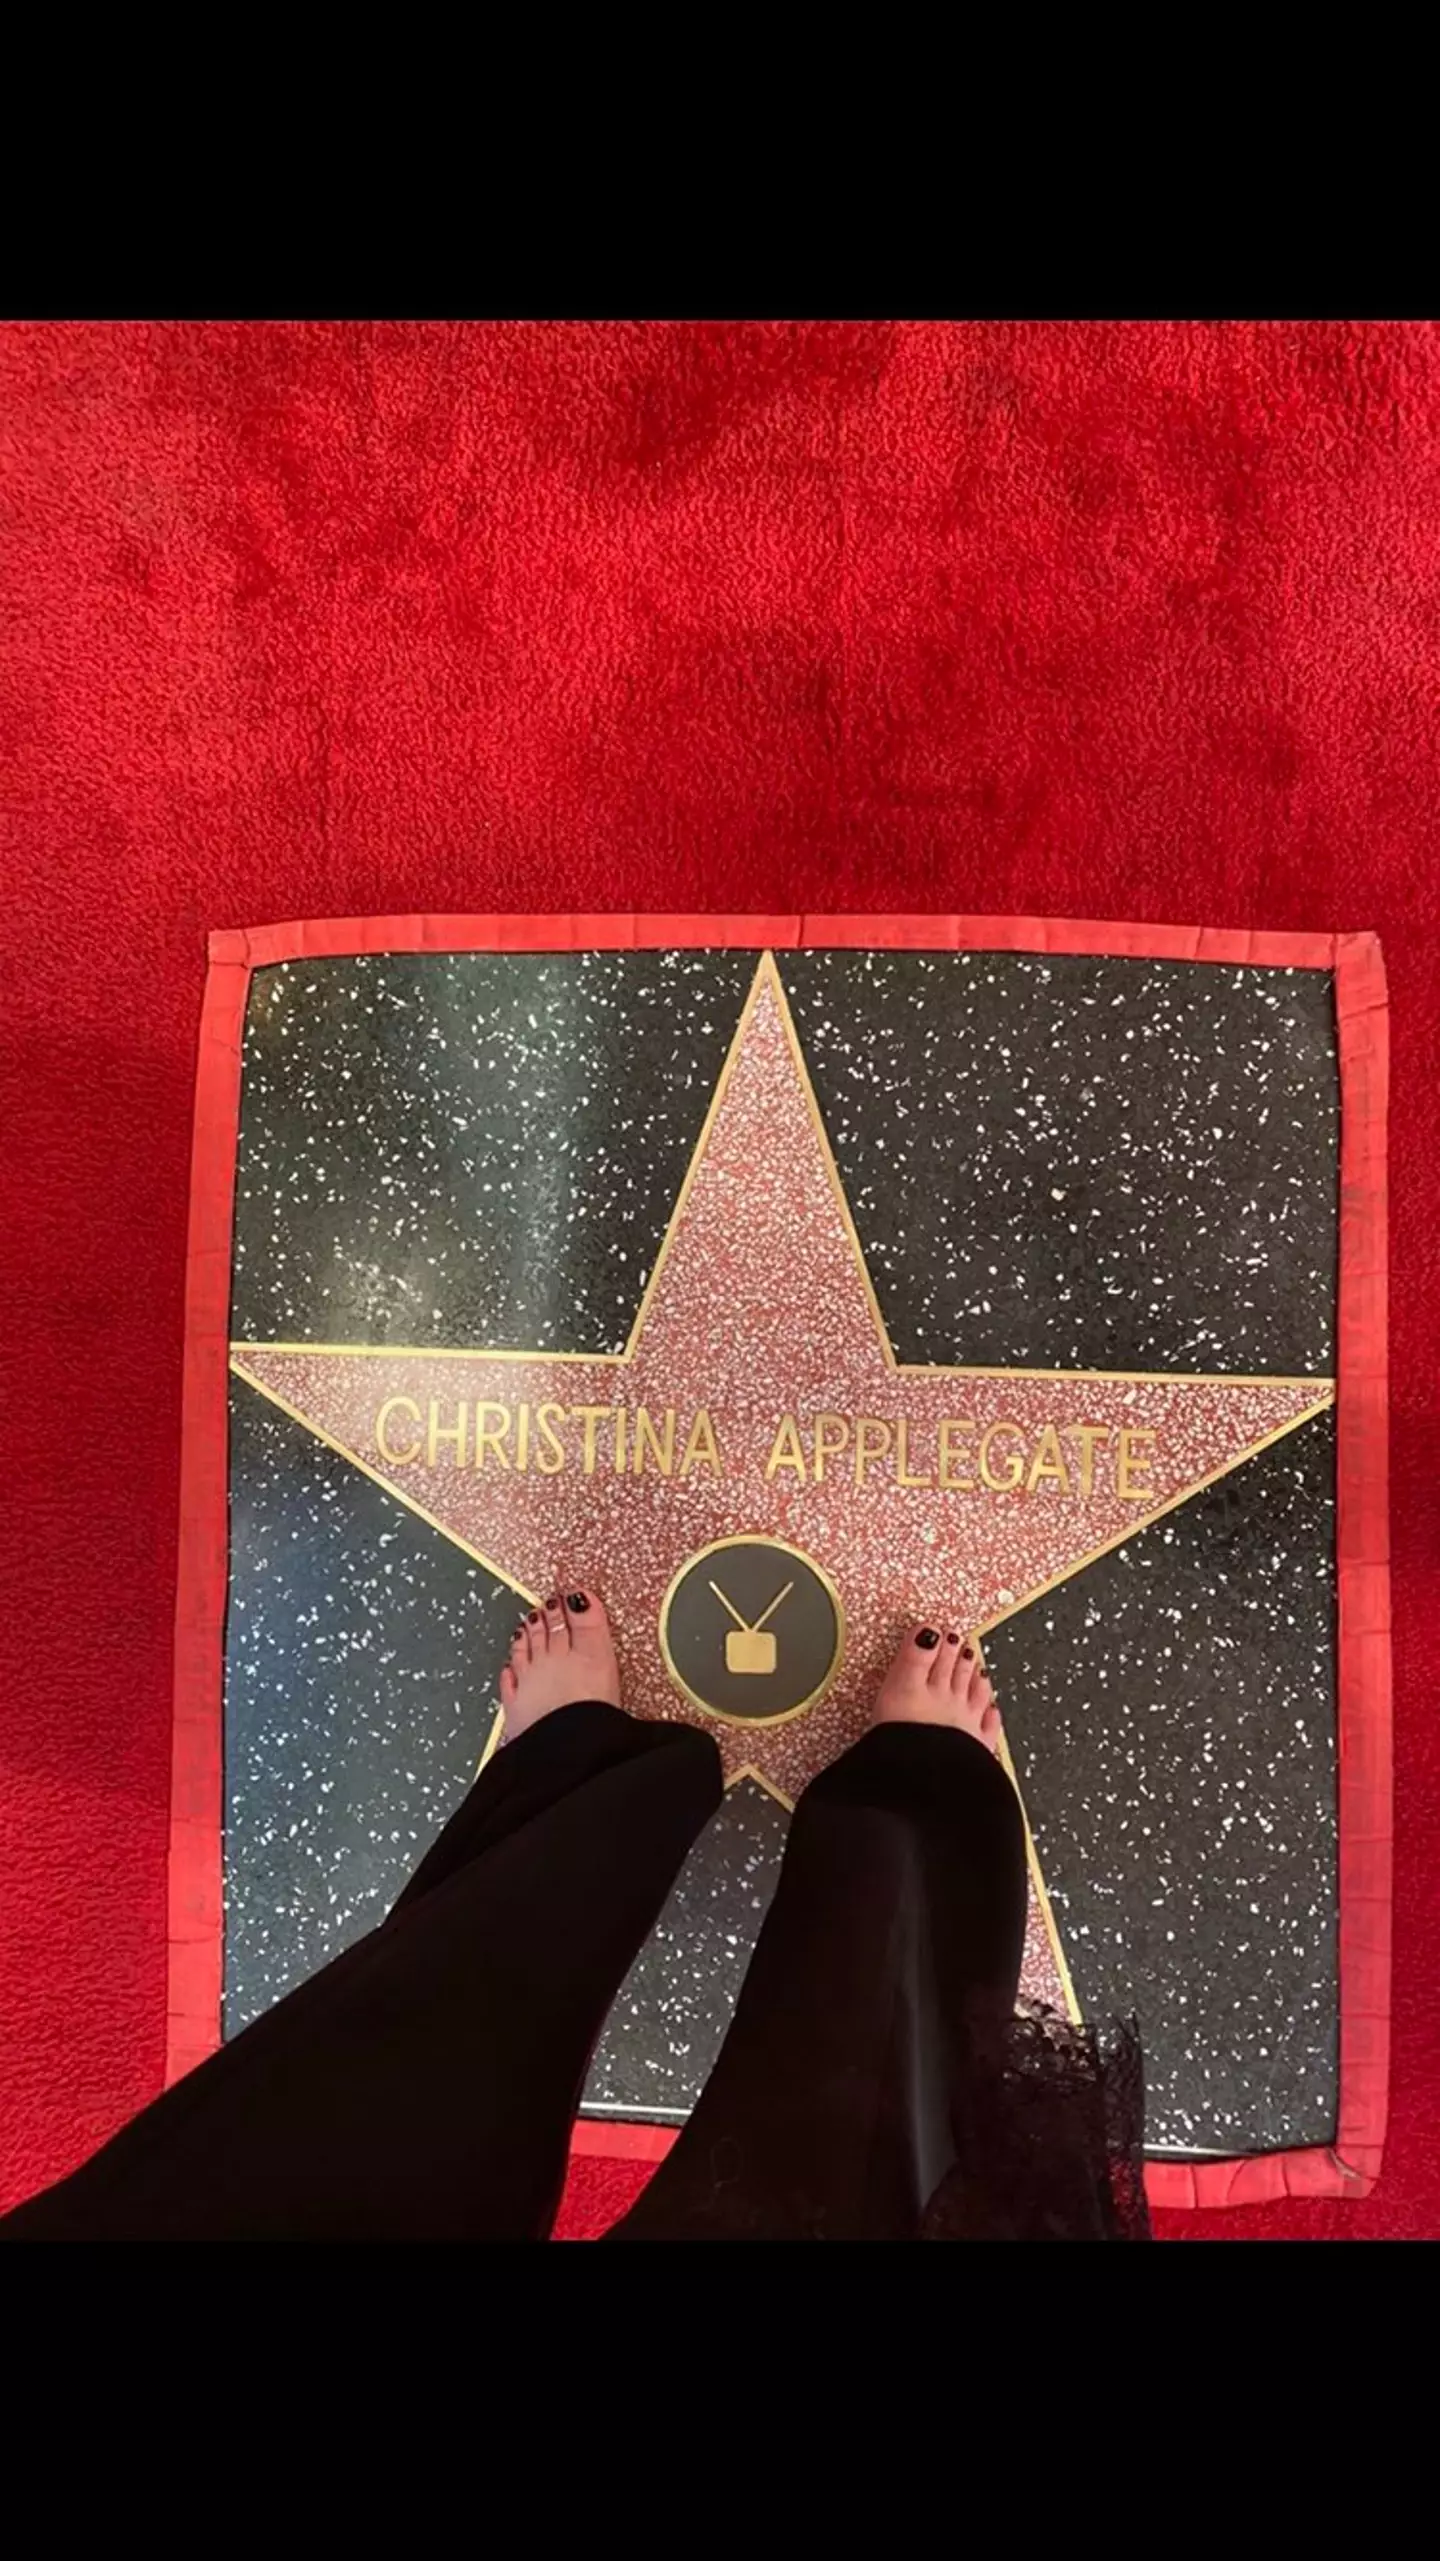 Christina Applegate explained her decision to appear barefoot.